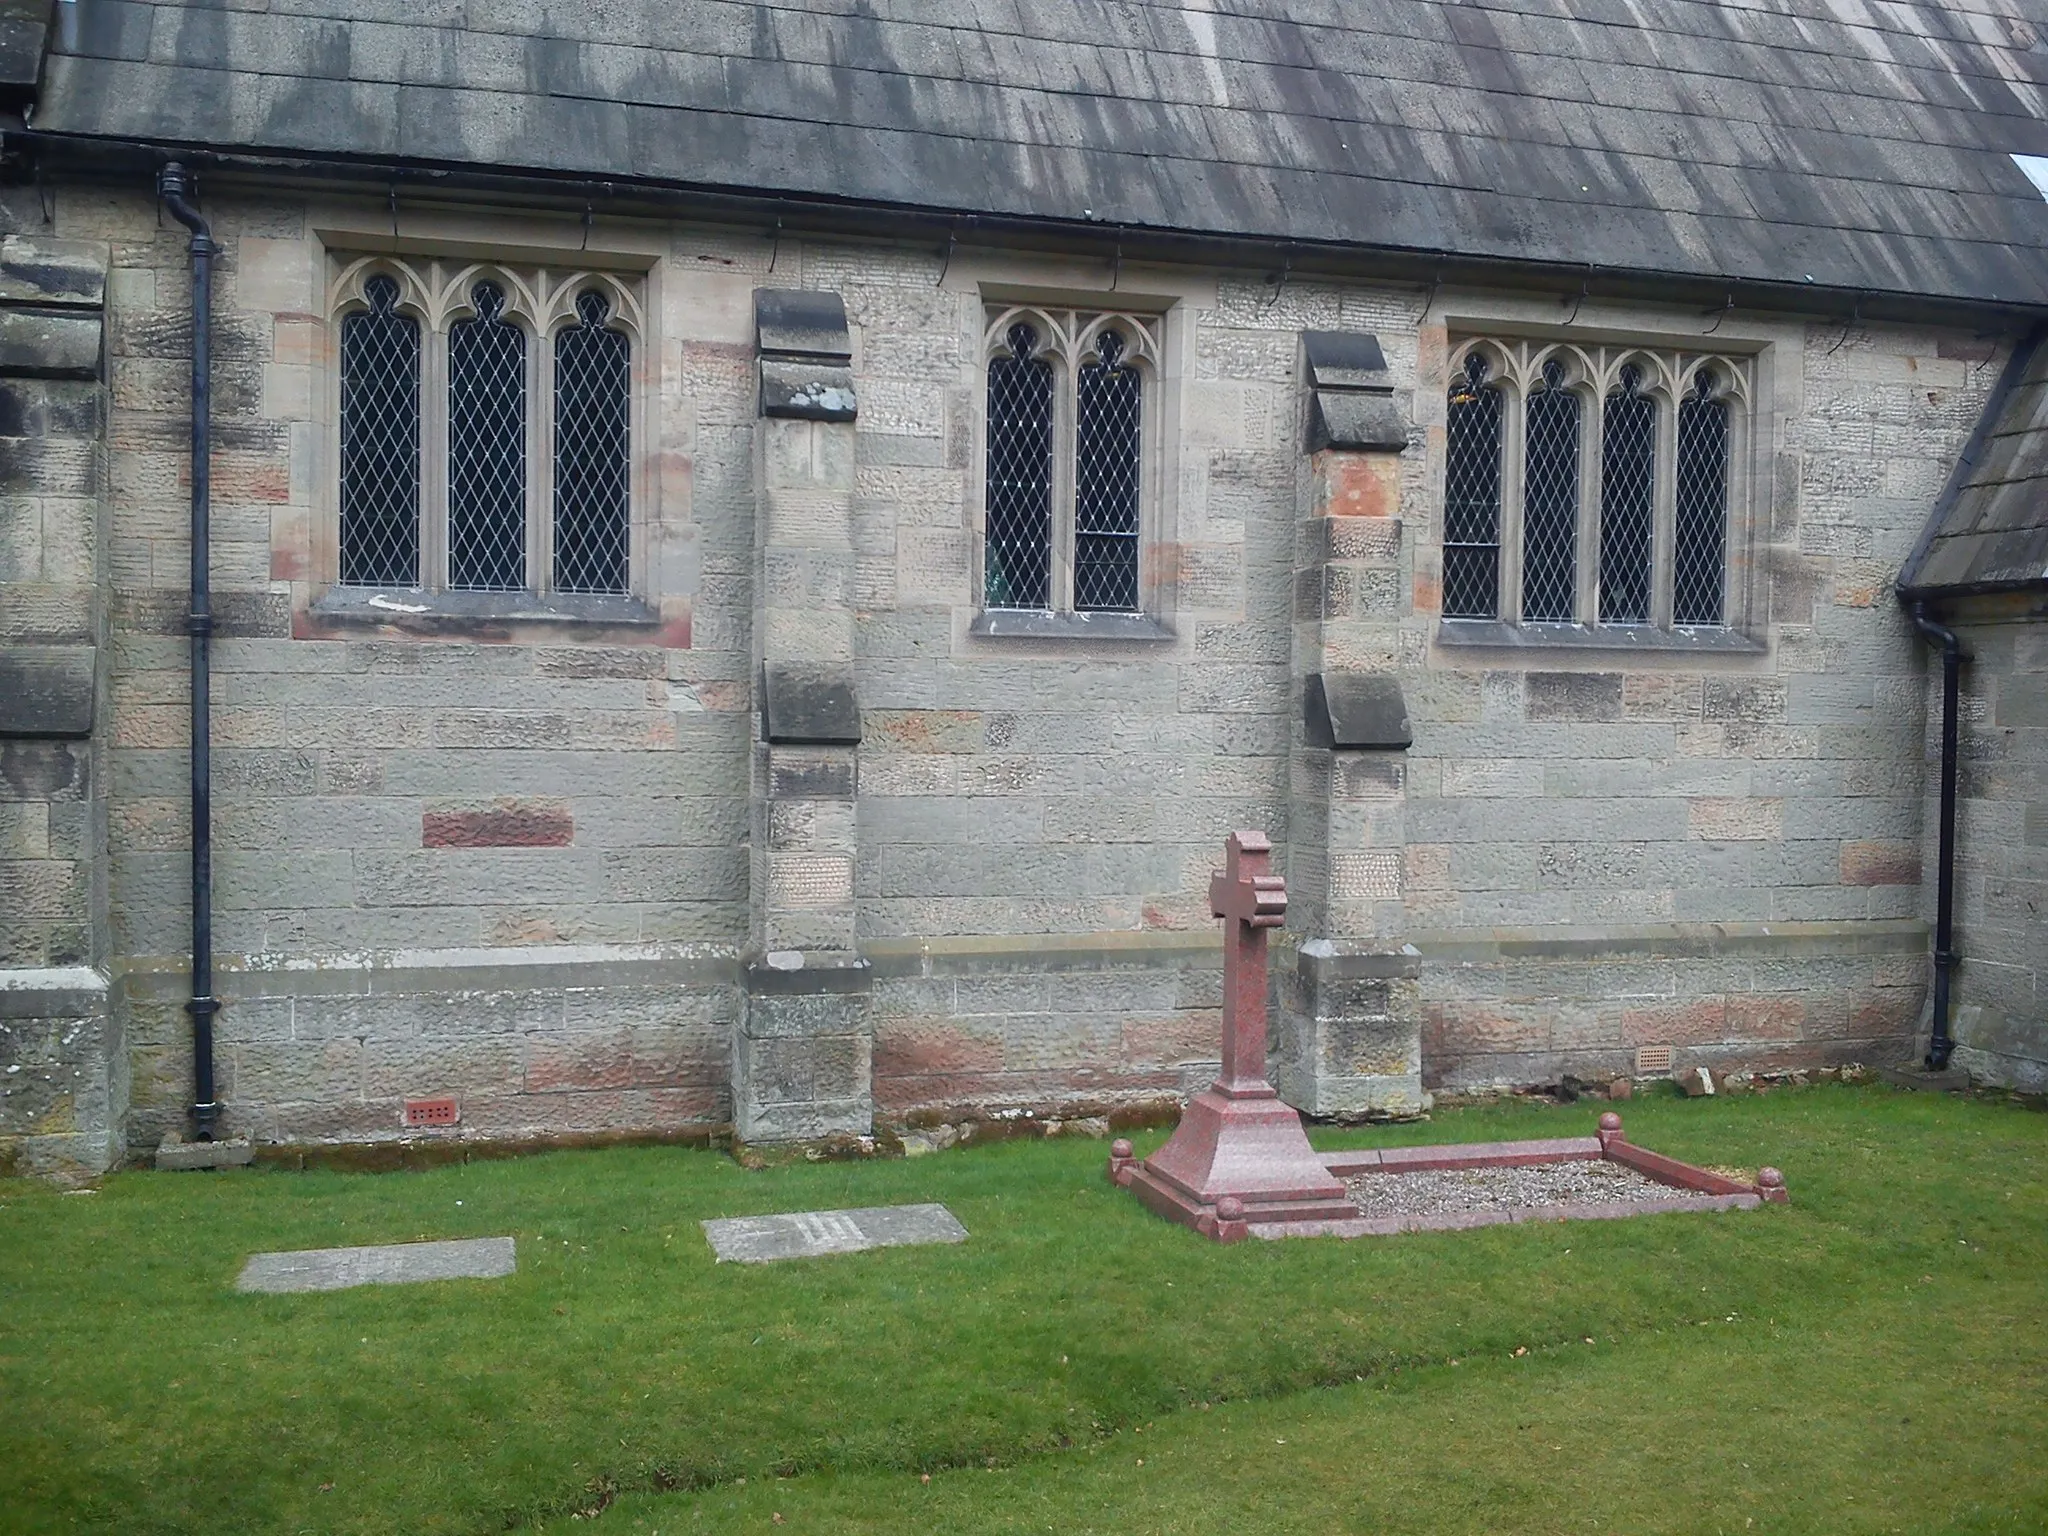 Photo showing: churchyard, graves of (as seen from left to right:) Evelyn Maude Anson, Countess of Lichfield (1887-1945), Thomas Edward Anson, 4th Earl of Lichfield (1883-1960) and Thomas Francis Anson, 3rd Earl of Lichfield (1856-1918)